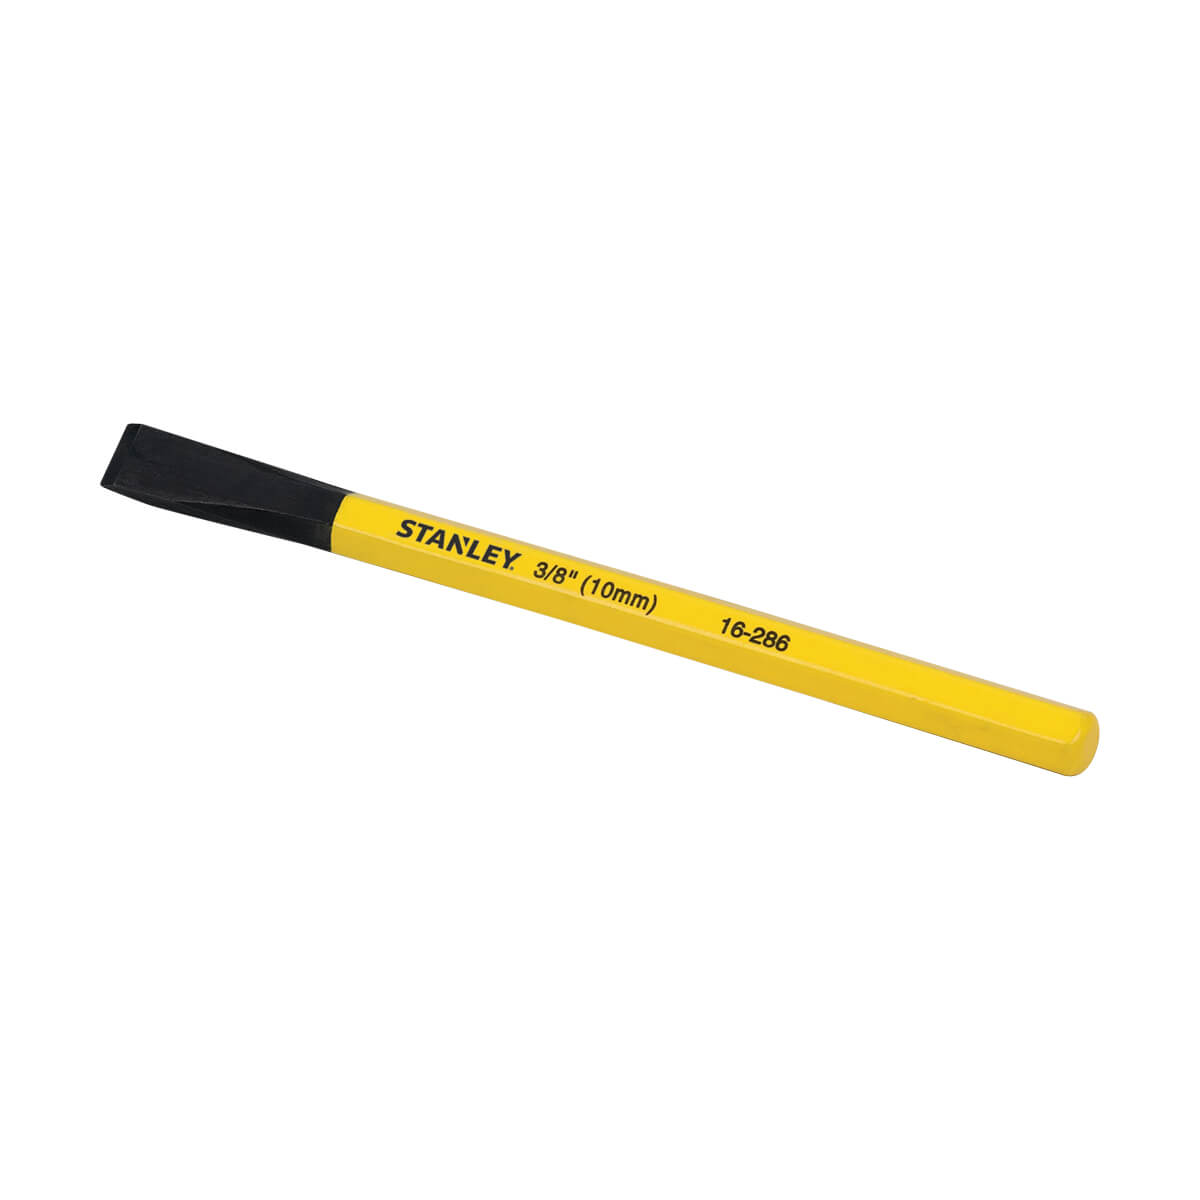 Stanley Cold Chisel - 3/8-in x 5-9/16-in